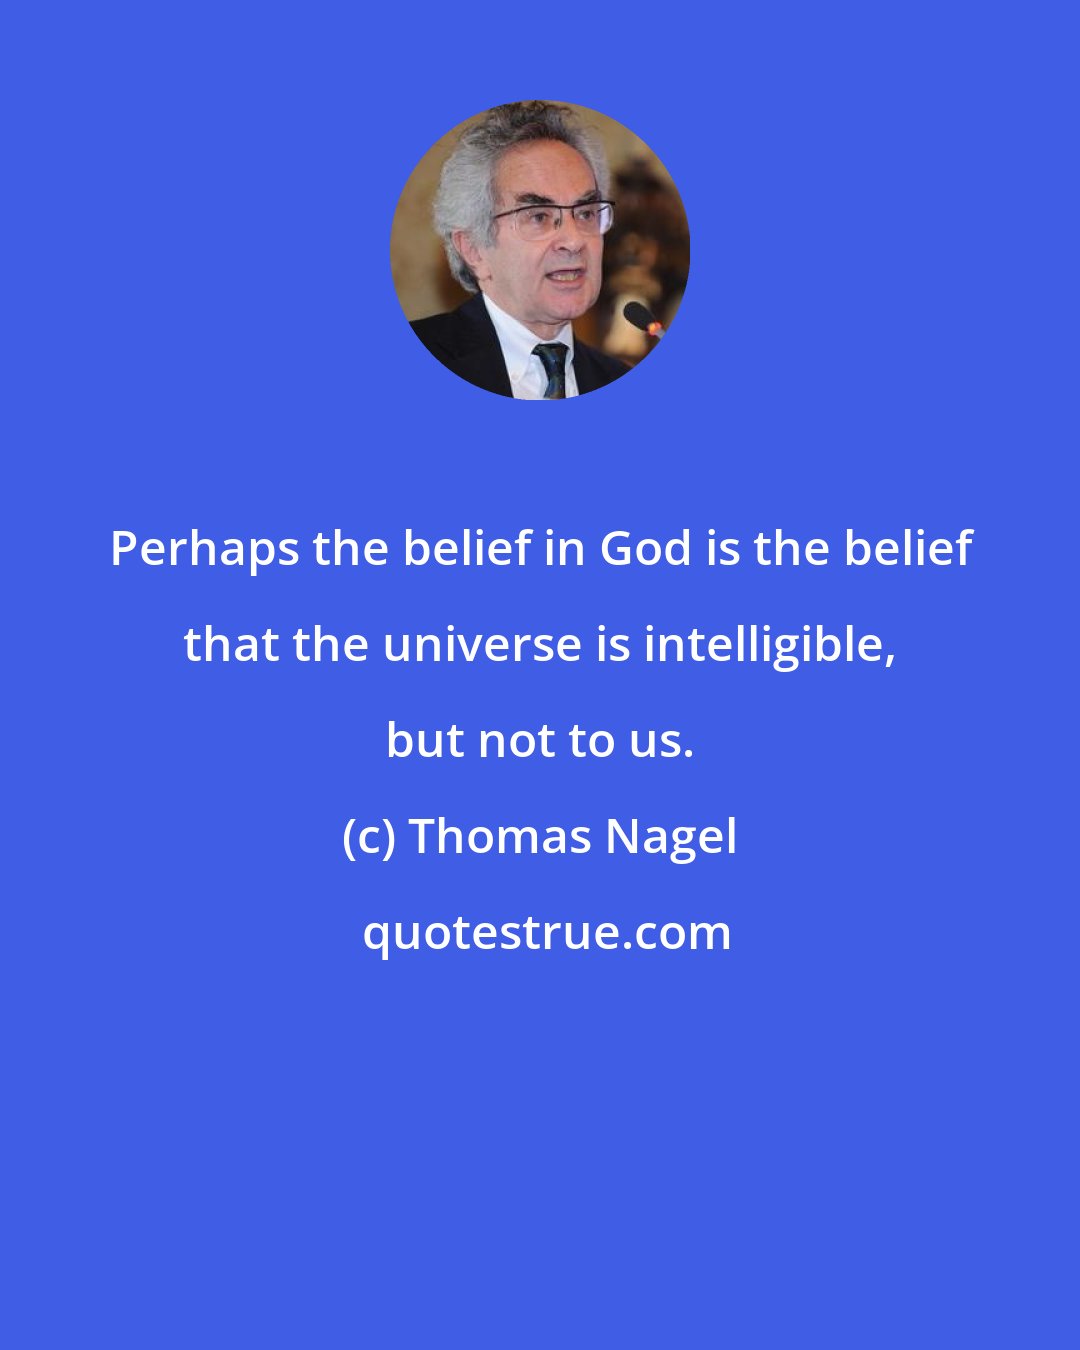 Thomas Nagel: Perhaps the belief in God is the belief that the universe is intelligible, but not to us.